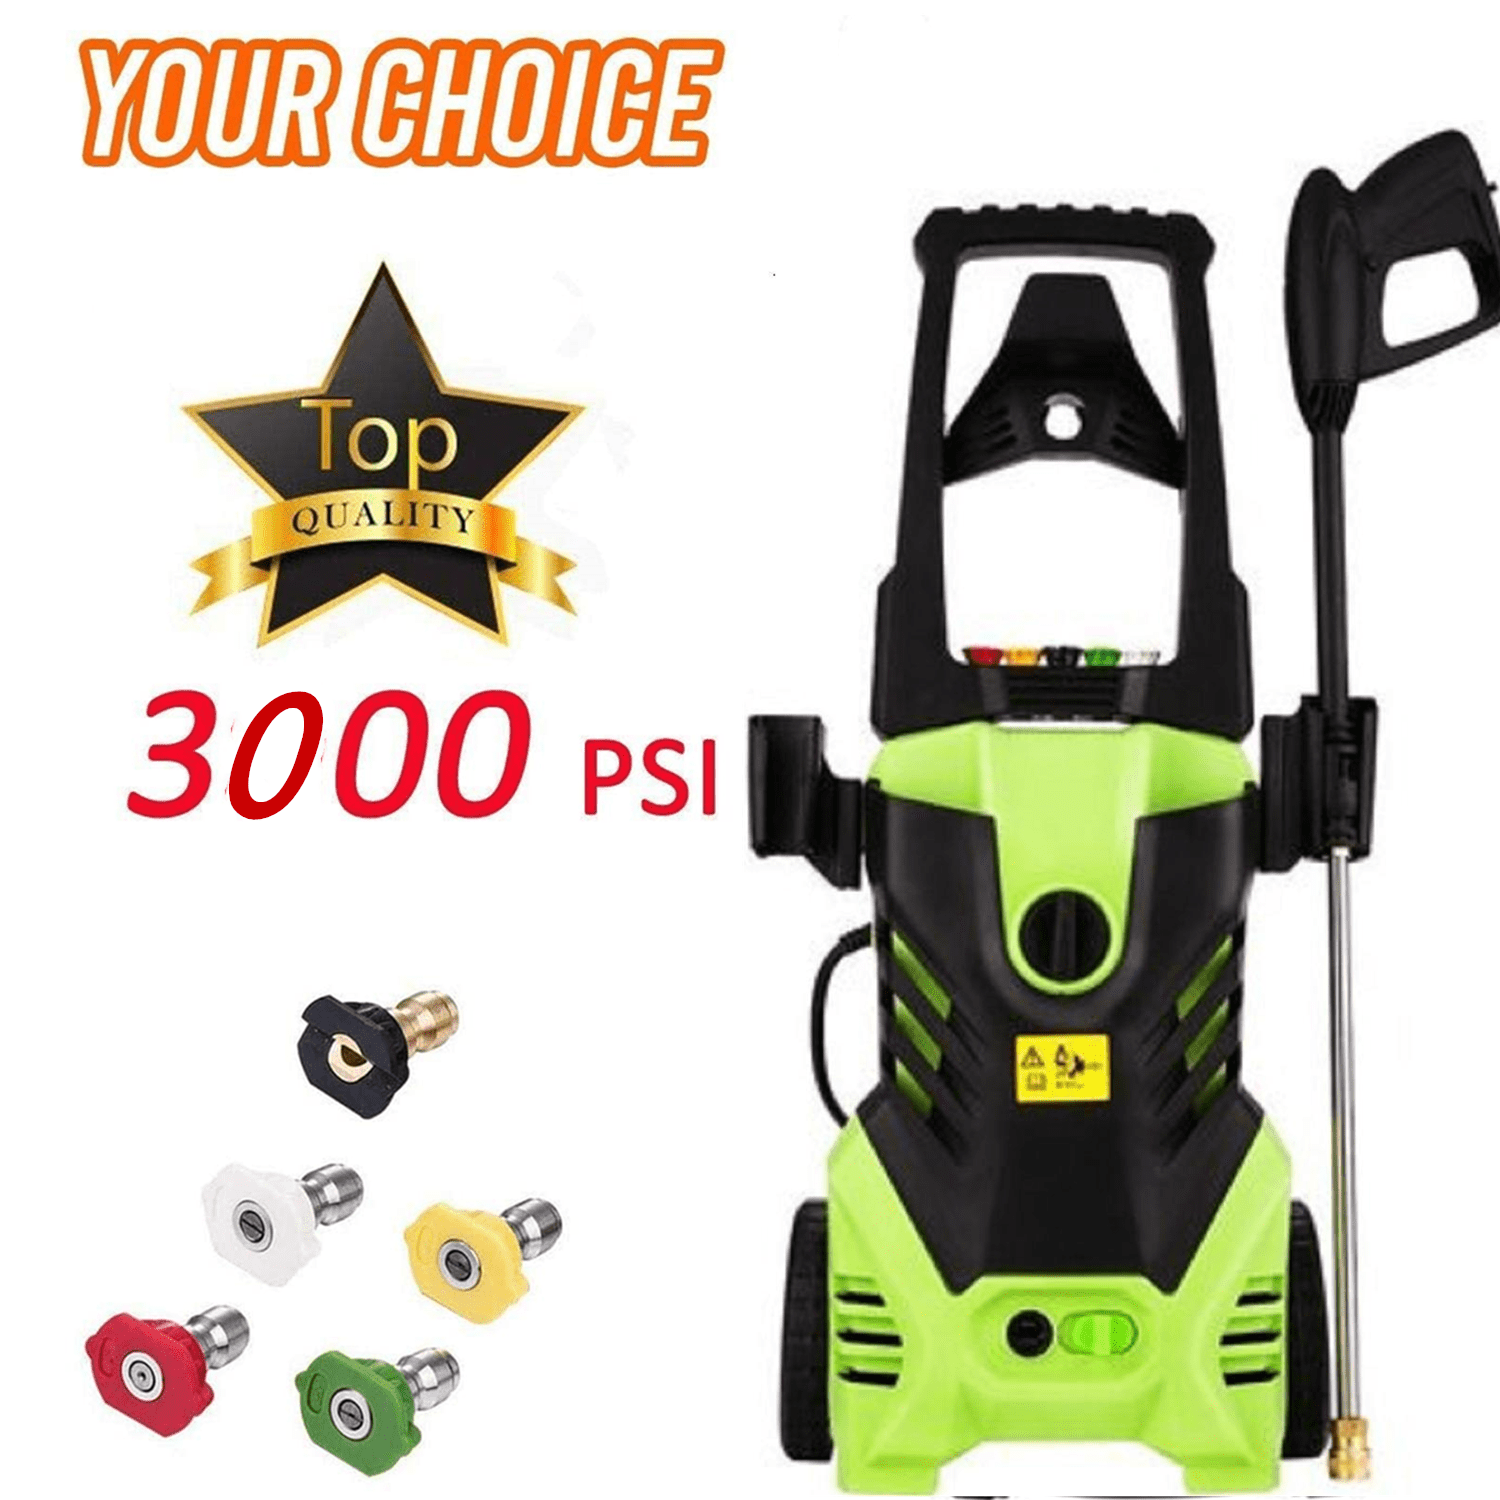 High Electric Pressure Washer,Car Washer， Power Washer with Max3000 PSI,6.0L/Min, (5) Nozzle Adapter, Longer Cables and Hoses and Detergent Tank,for Cleaning C ars, Houses Driveways, Patios